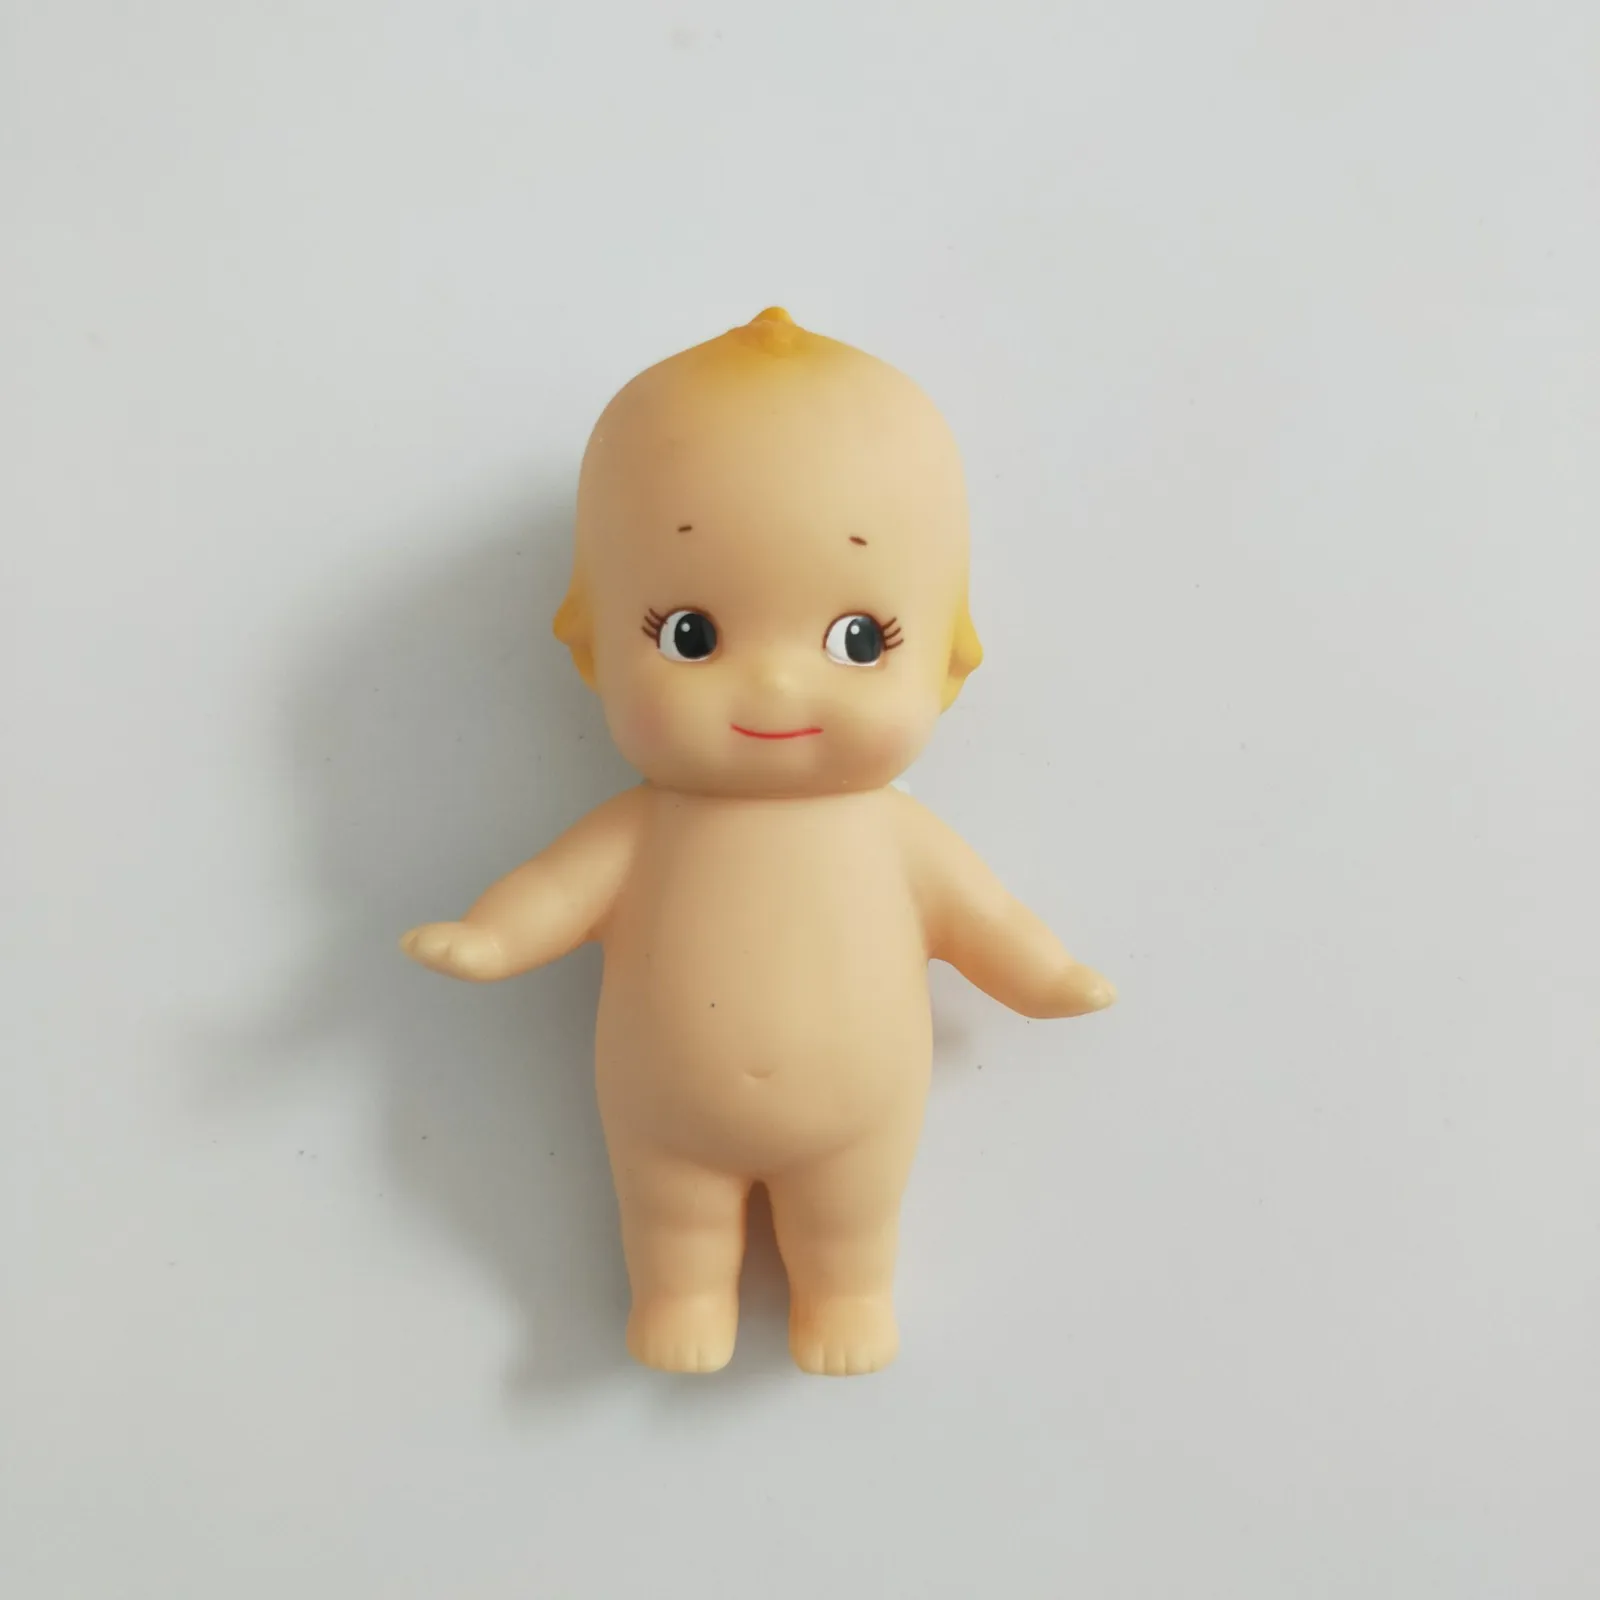 Cute Mini Vintage Kewpie Doll Baby Doll Rubber Retro Toy Collection Kids Christmas Gifts